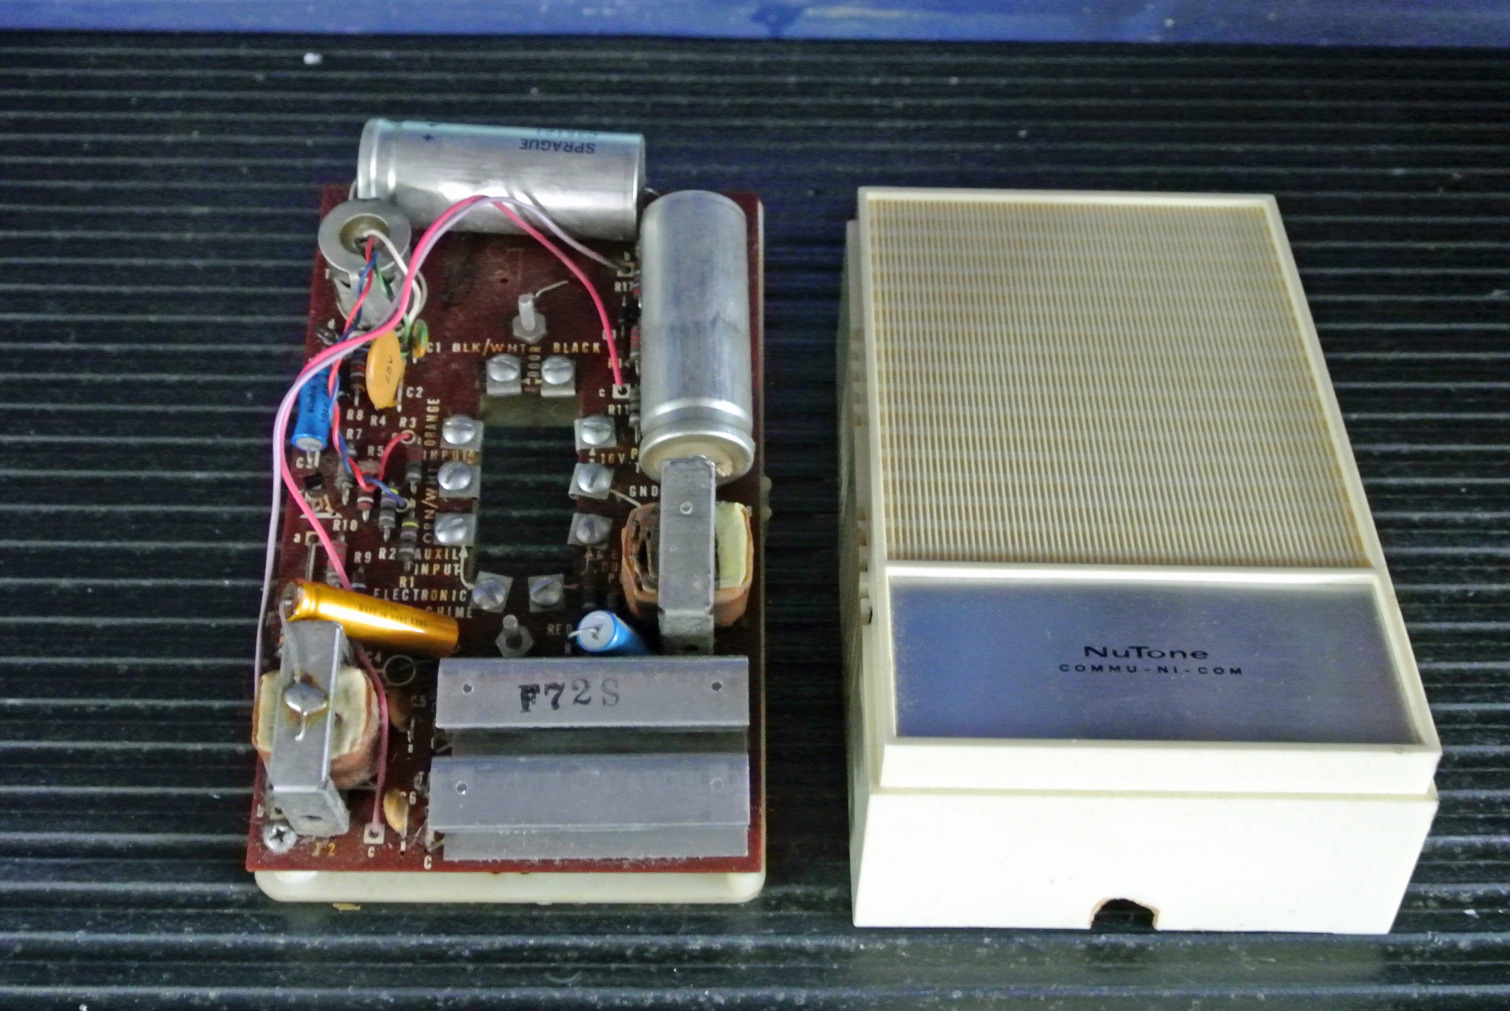 nutone 470 amplifier with cover.jpg